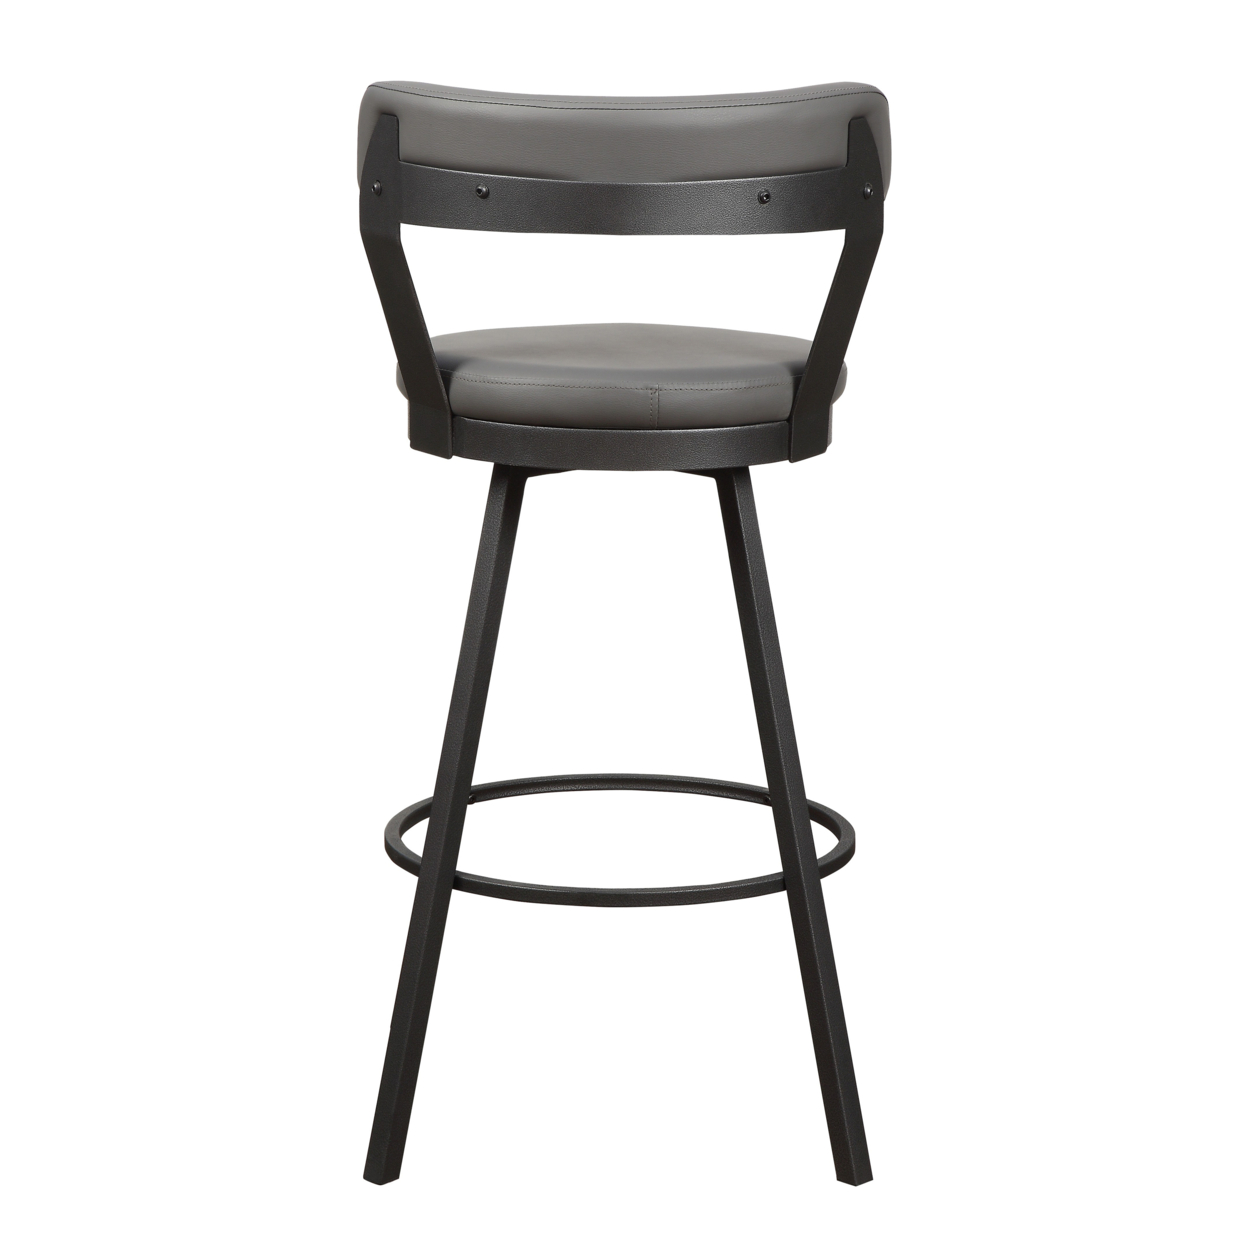 Leatherette Pub Chair With Curved Design Open Backrest, Set Of 2,Light Gray- Saltoro Sherpi